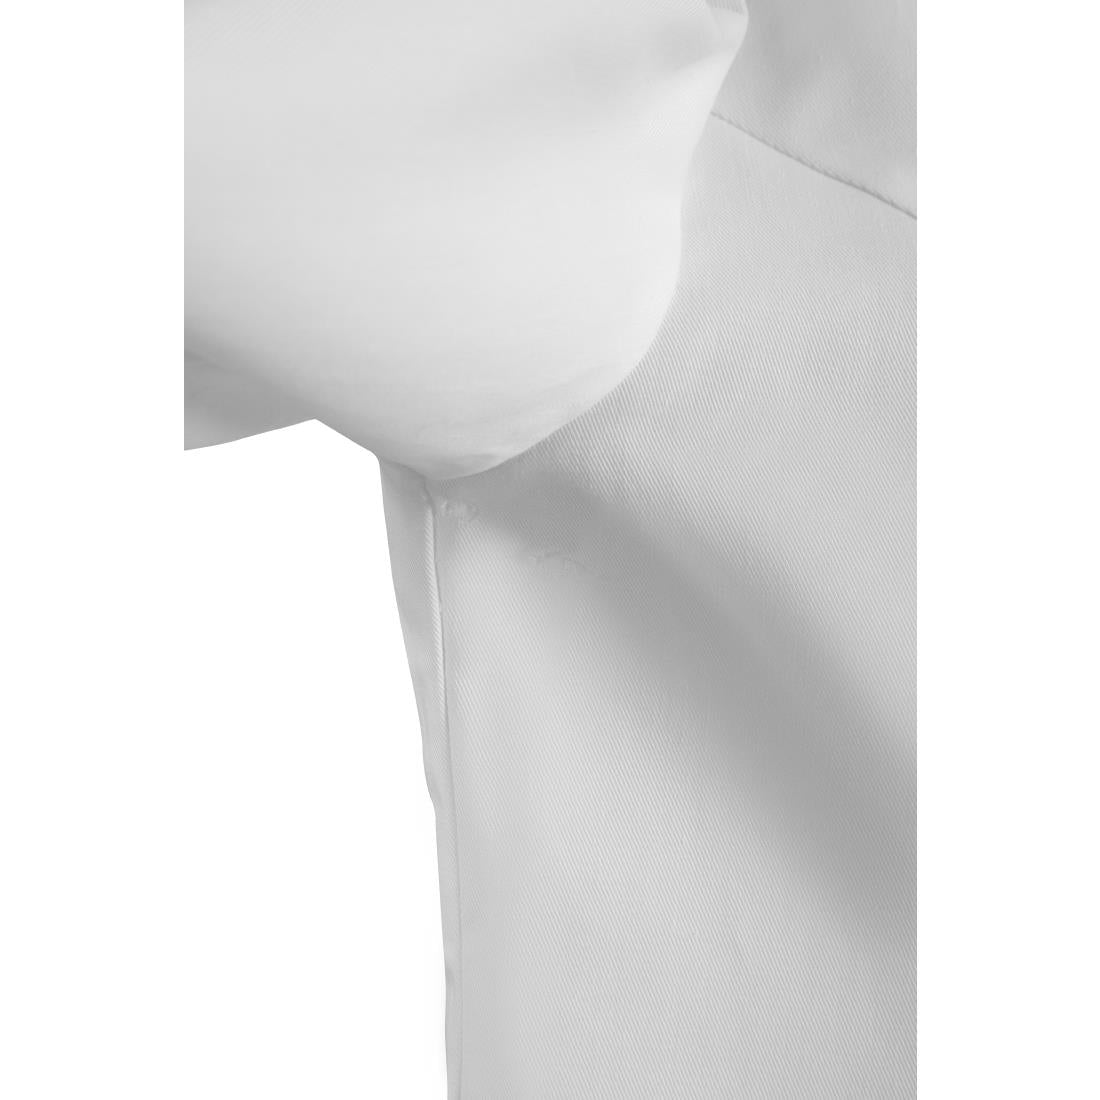 BB701-M Whites Ladies Fitted Jacket - Size M JD Catering Equipment Solutions Ltd